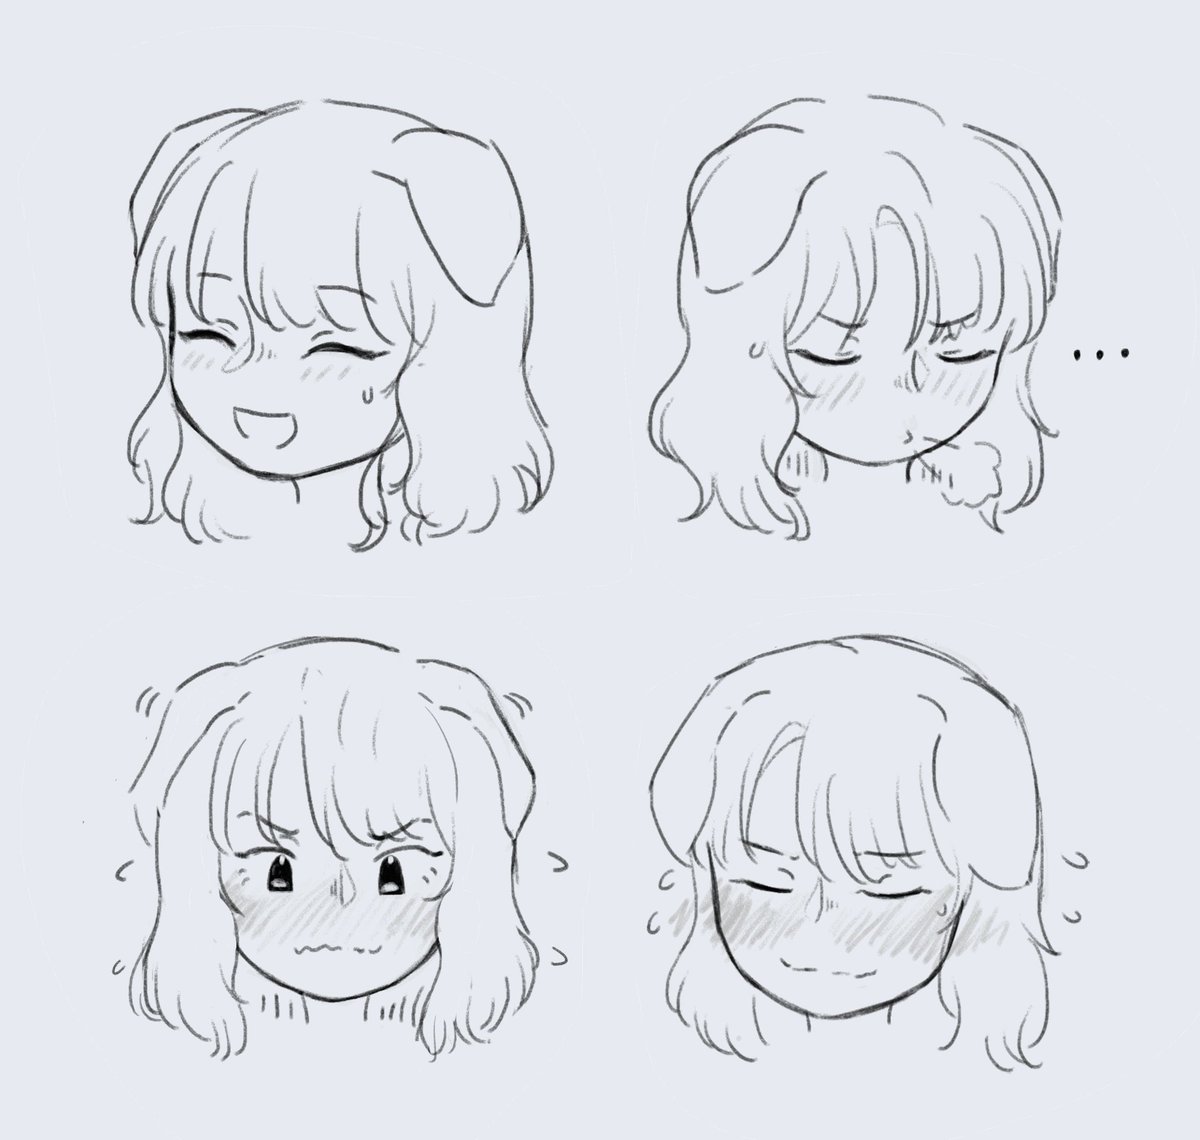 hello main I don't have fanart but here are some doodles of my oc 🥰 